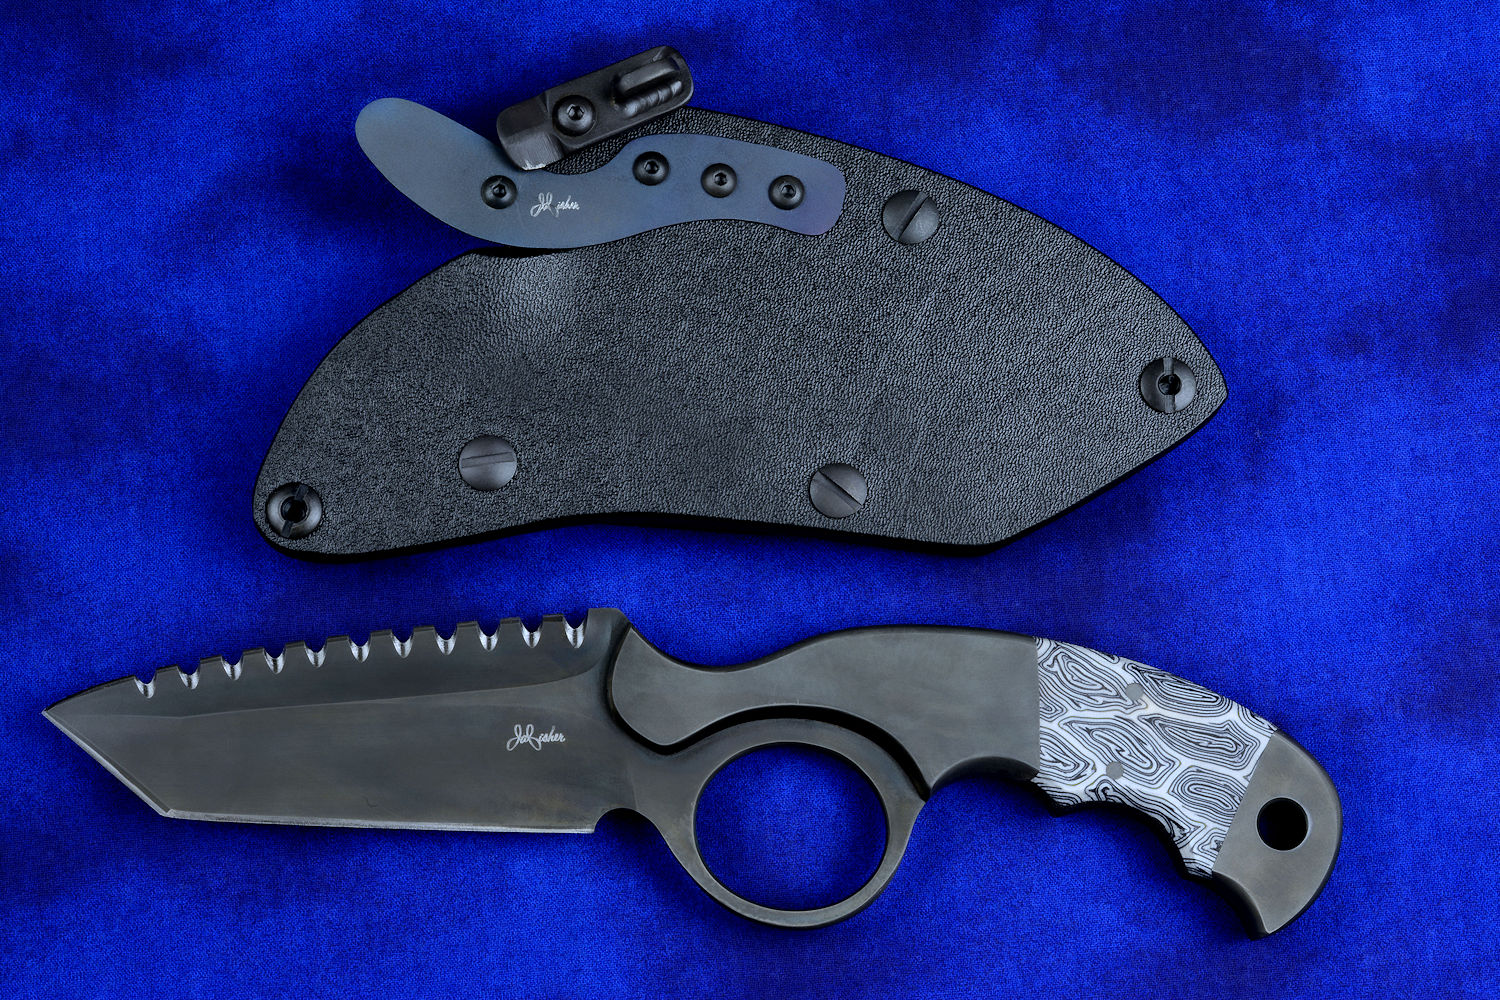 "Skeg"  tactical, counterterrorism, crossover knife, sheathed view in T4 Cryogenically treated ATS-34 high molybdenum martensitic stainless steel blade, 304 stainless steel bolsters, white and black tortoiseshell pattern G10 fiberglass/epoxy composite handle, hybrid tension tab-locking sheath in kydex, anodized aluminum, black oxide stainless steel and anodized titanium